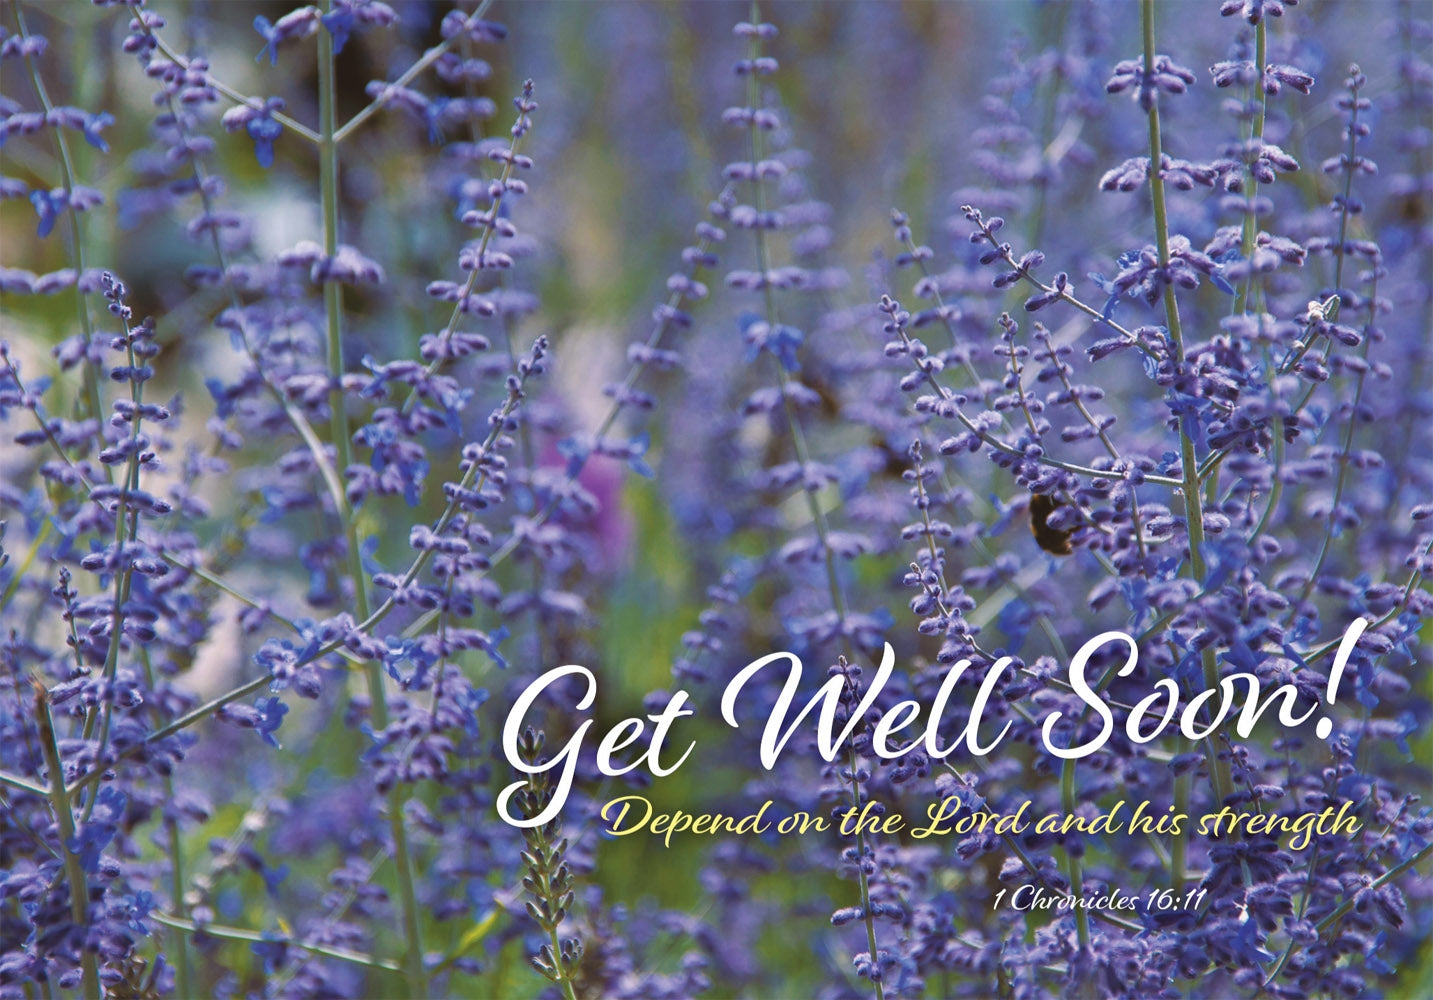 Get Well Soon - Lavender Std Card Gloss (6 Pack)Get Well Soon - Lavender Std Card Gloss (6 Pack)